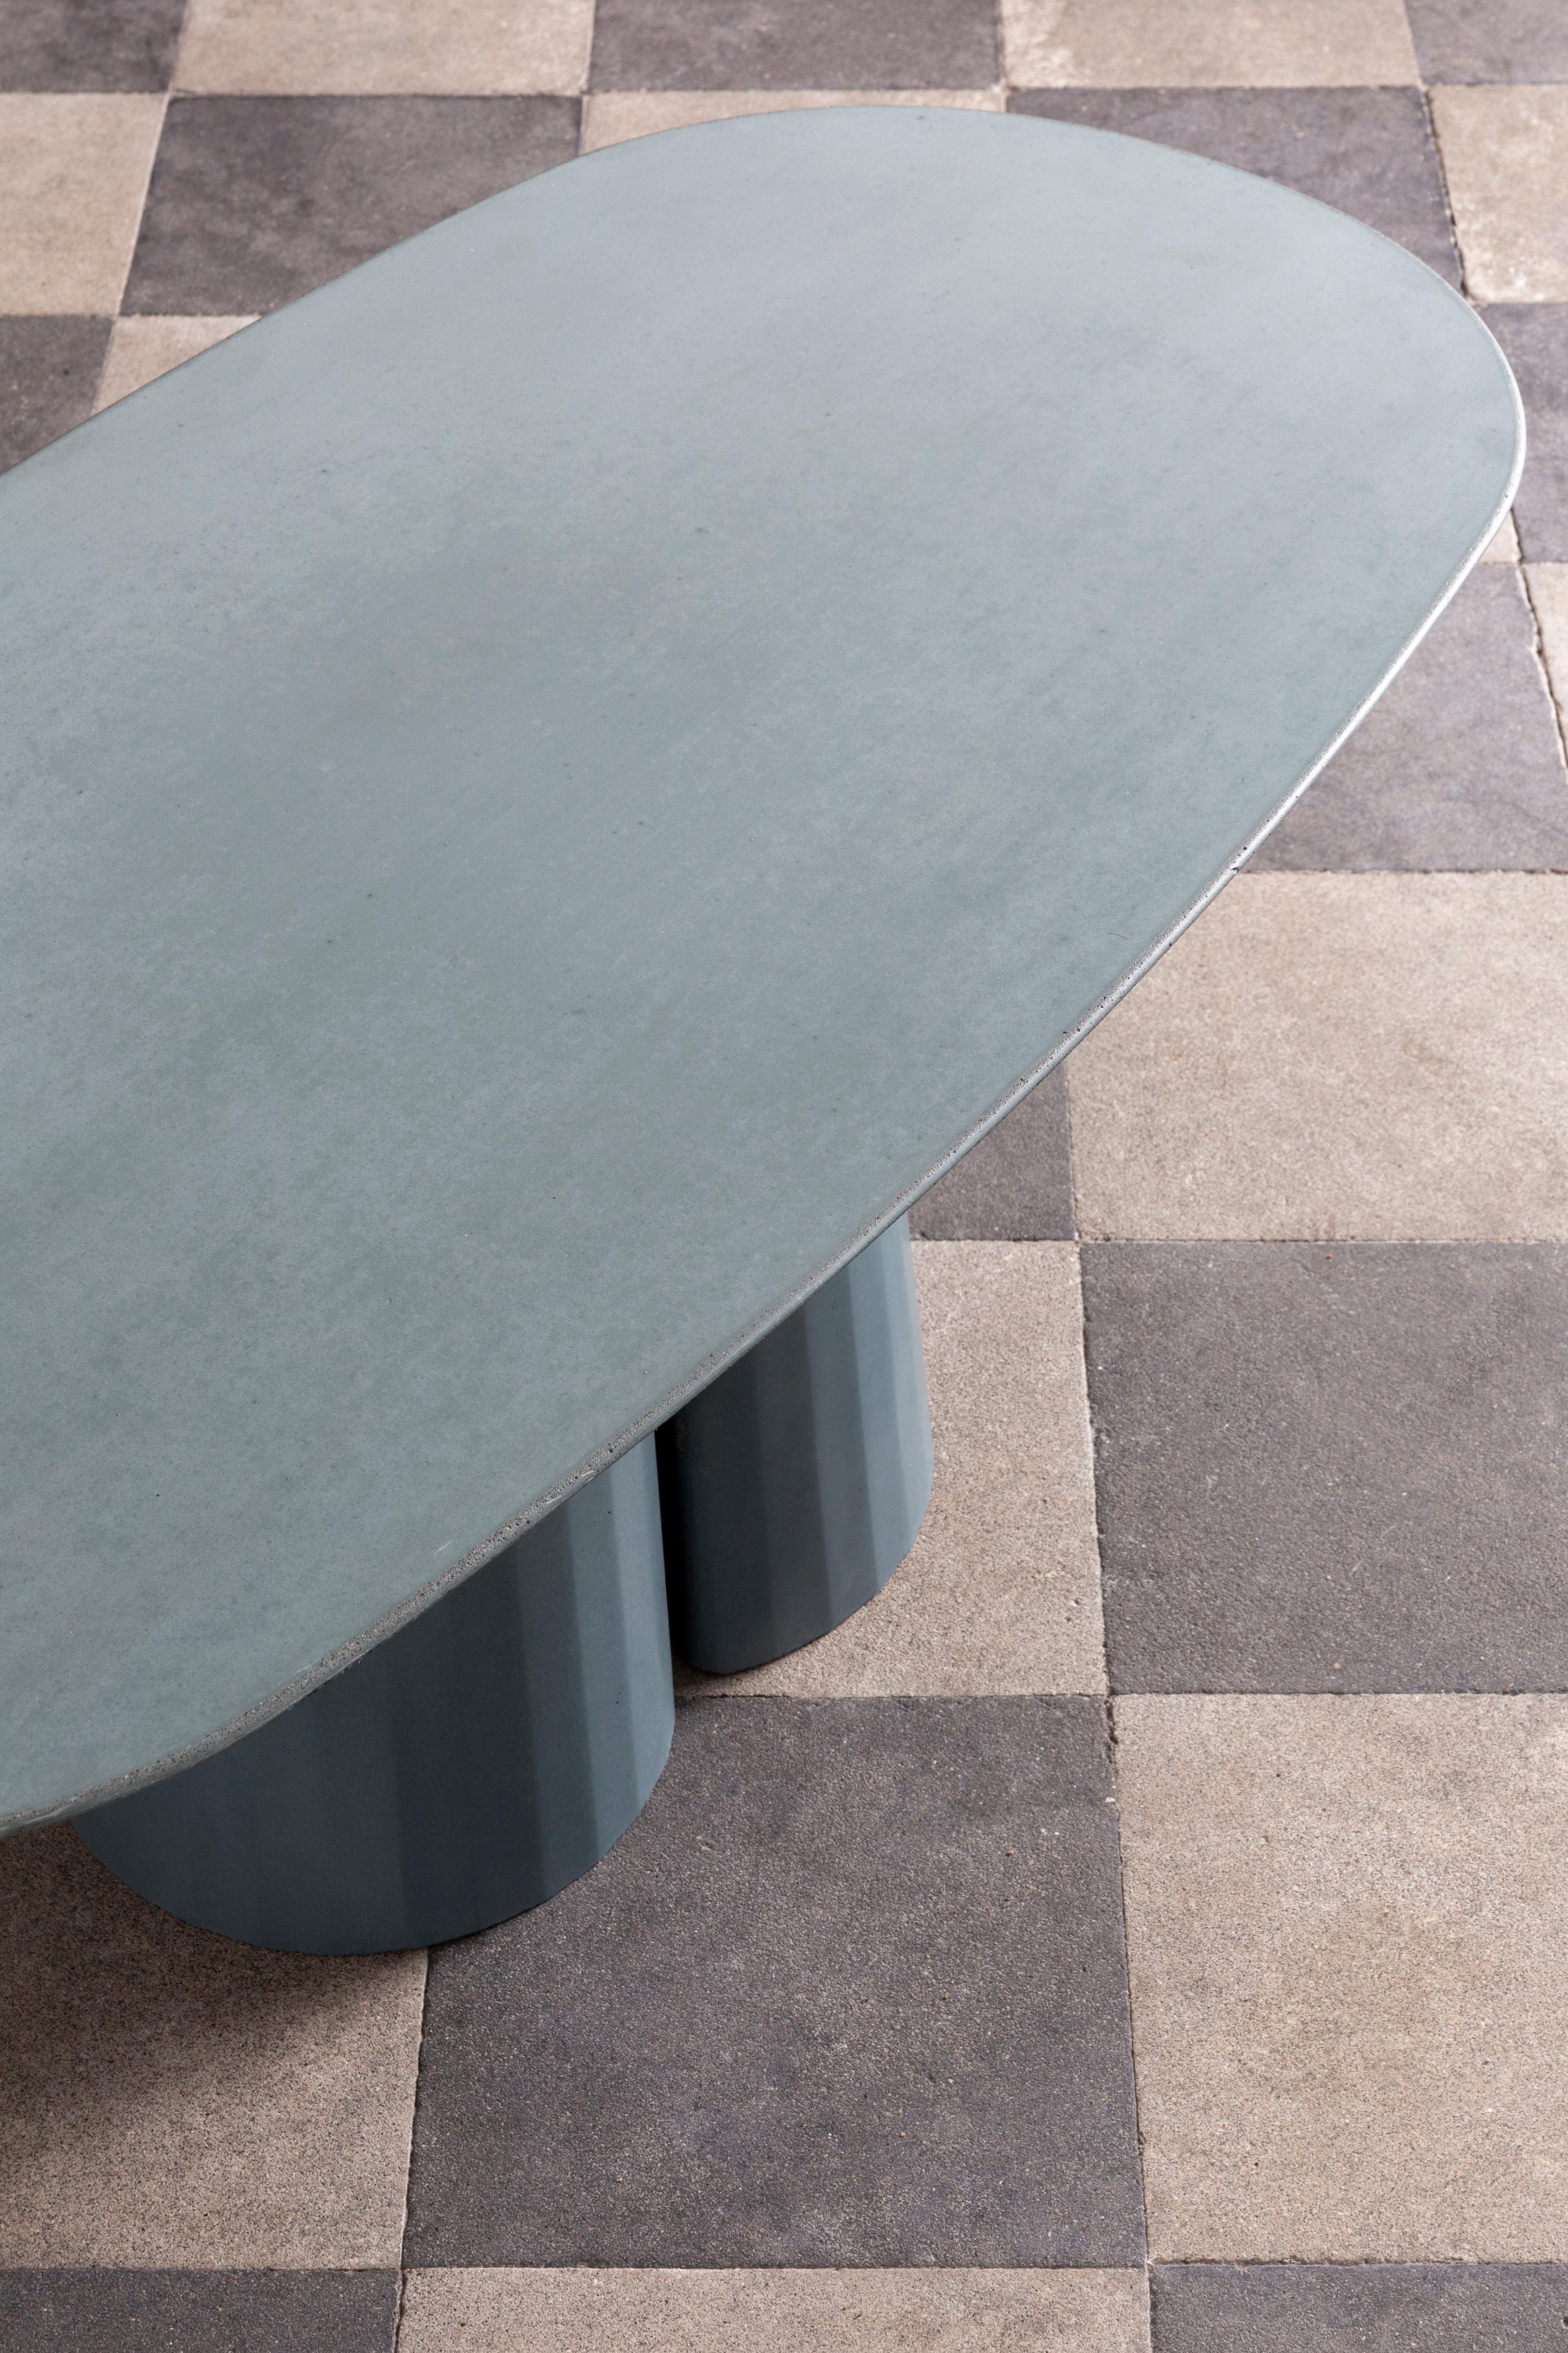 Cast Concrete Domestic Landscape Oval Coffee Table Ultramarine Cement Made in Italy For Sale